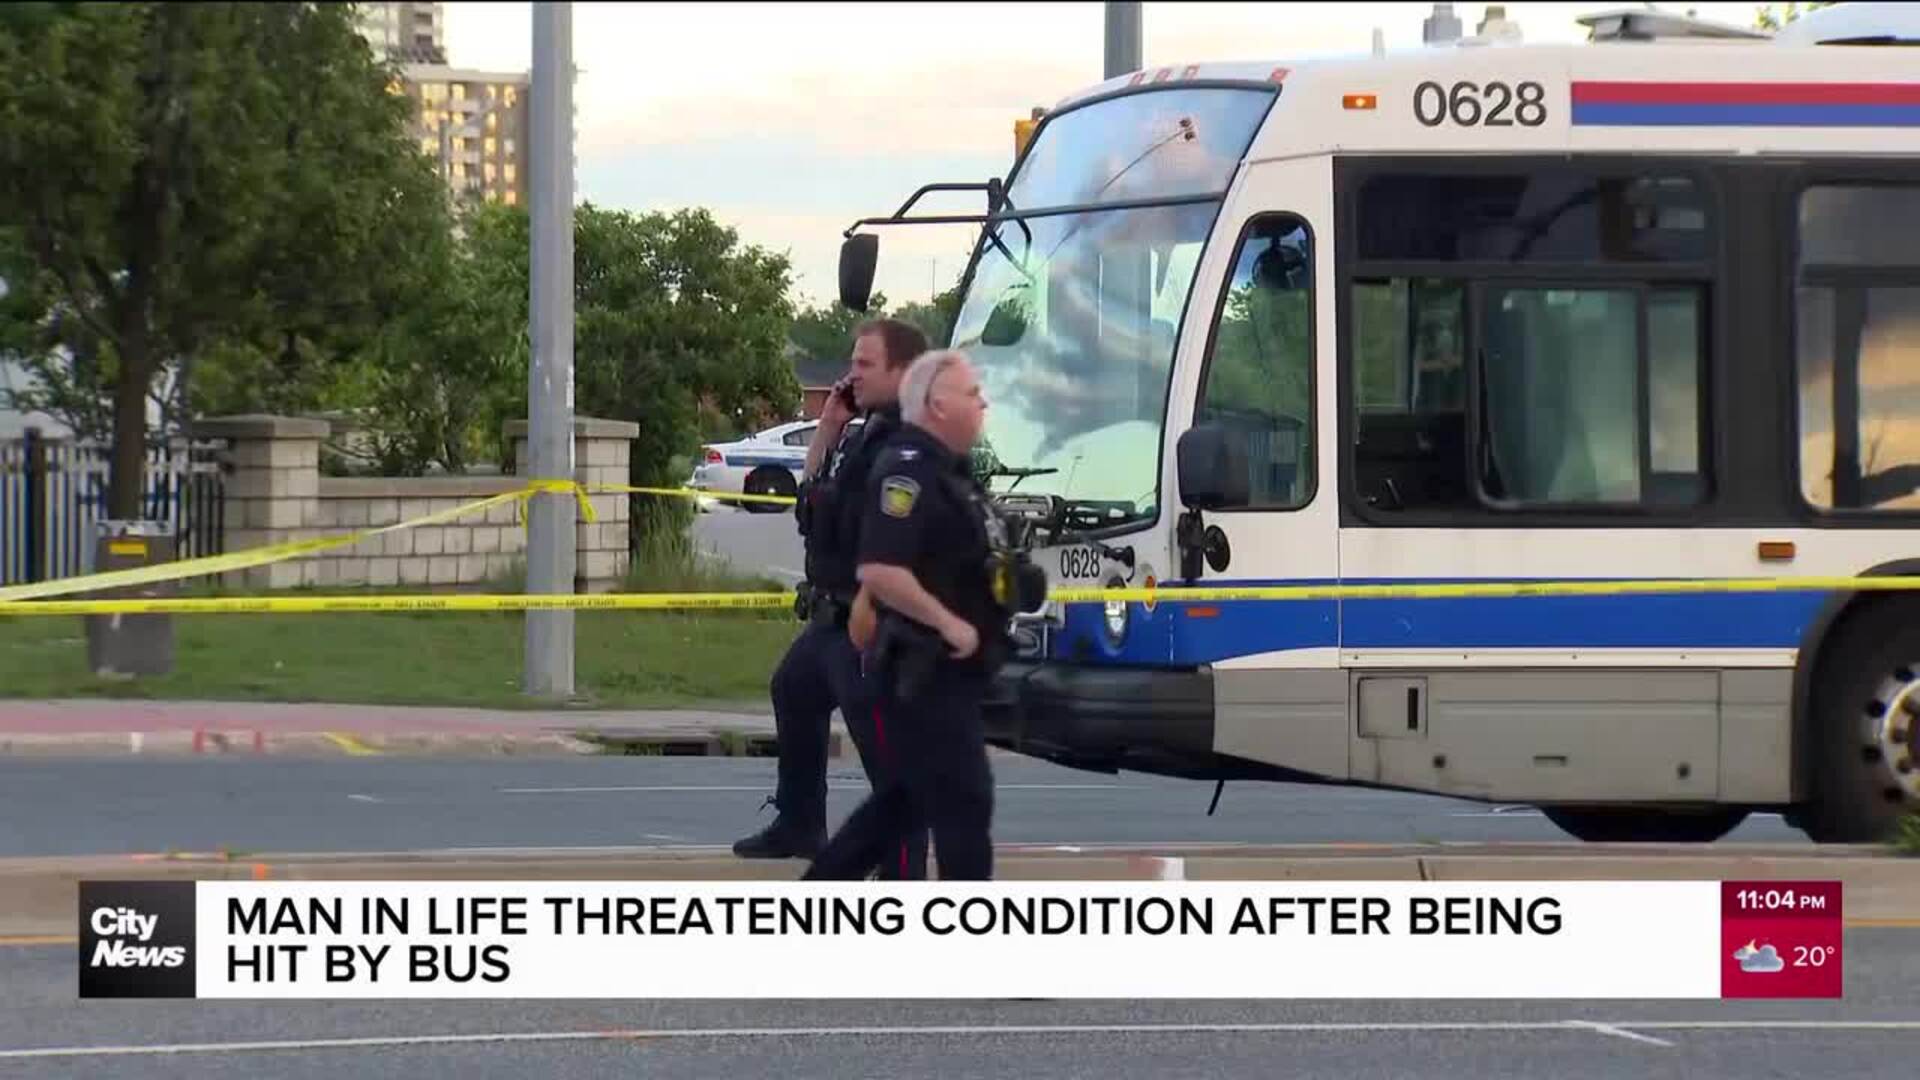 Man critically injured after being hit by bus in Brampton, police say